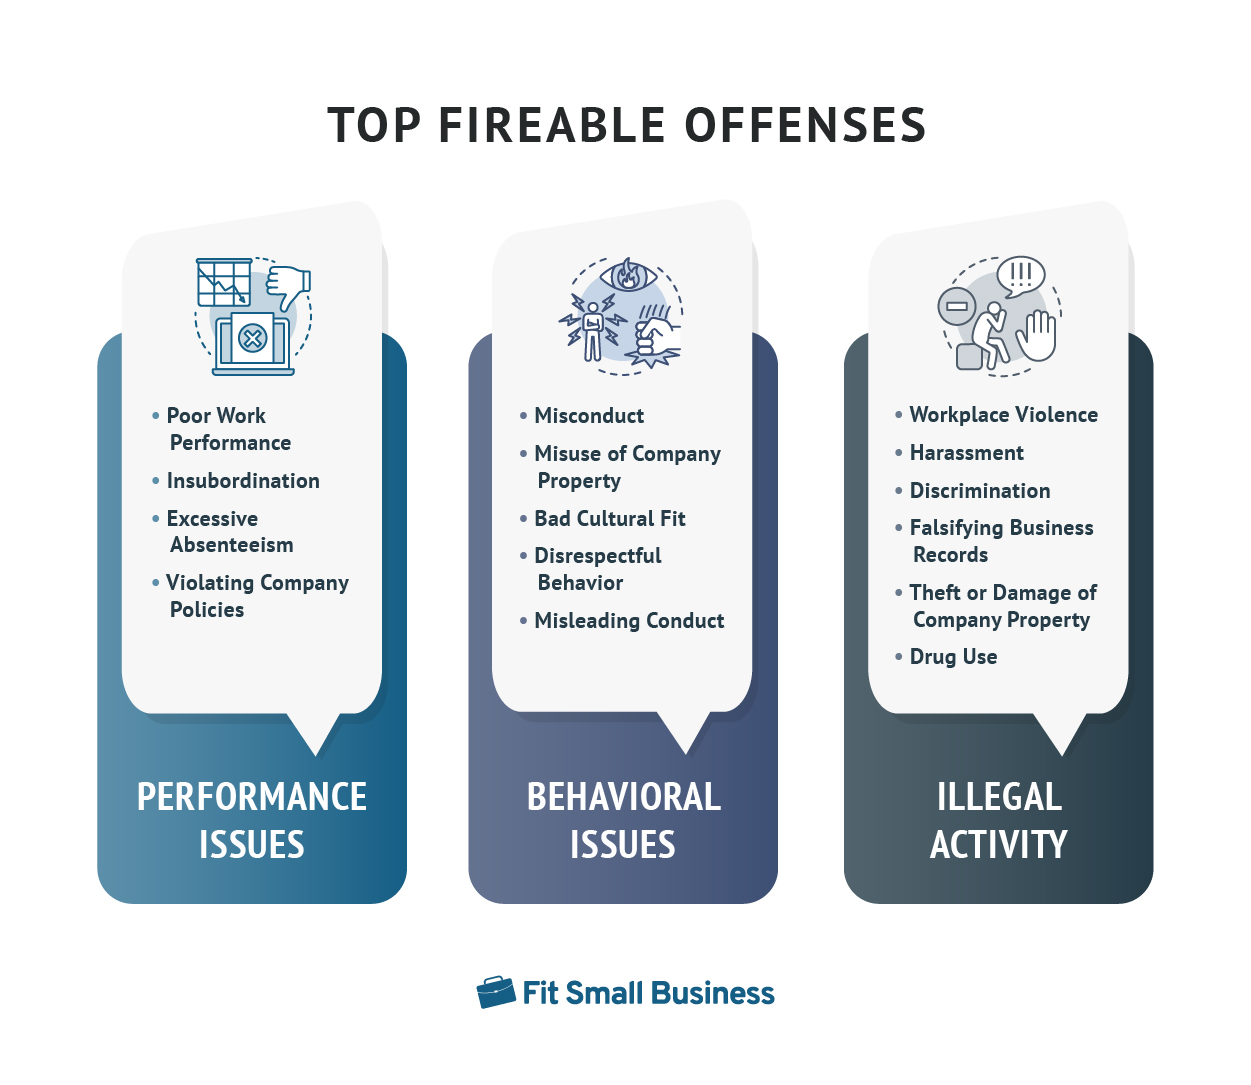 Top fireable offenses graphics.